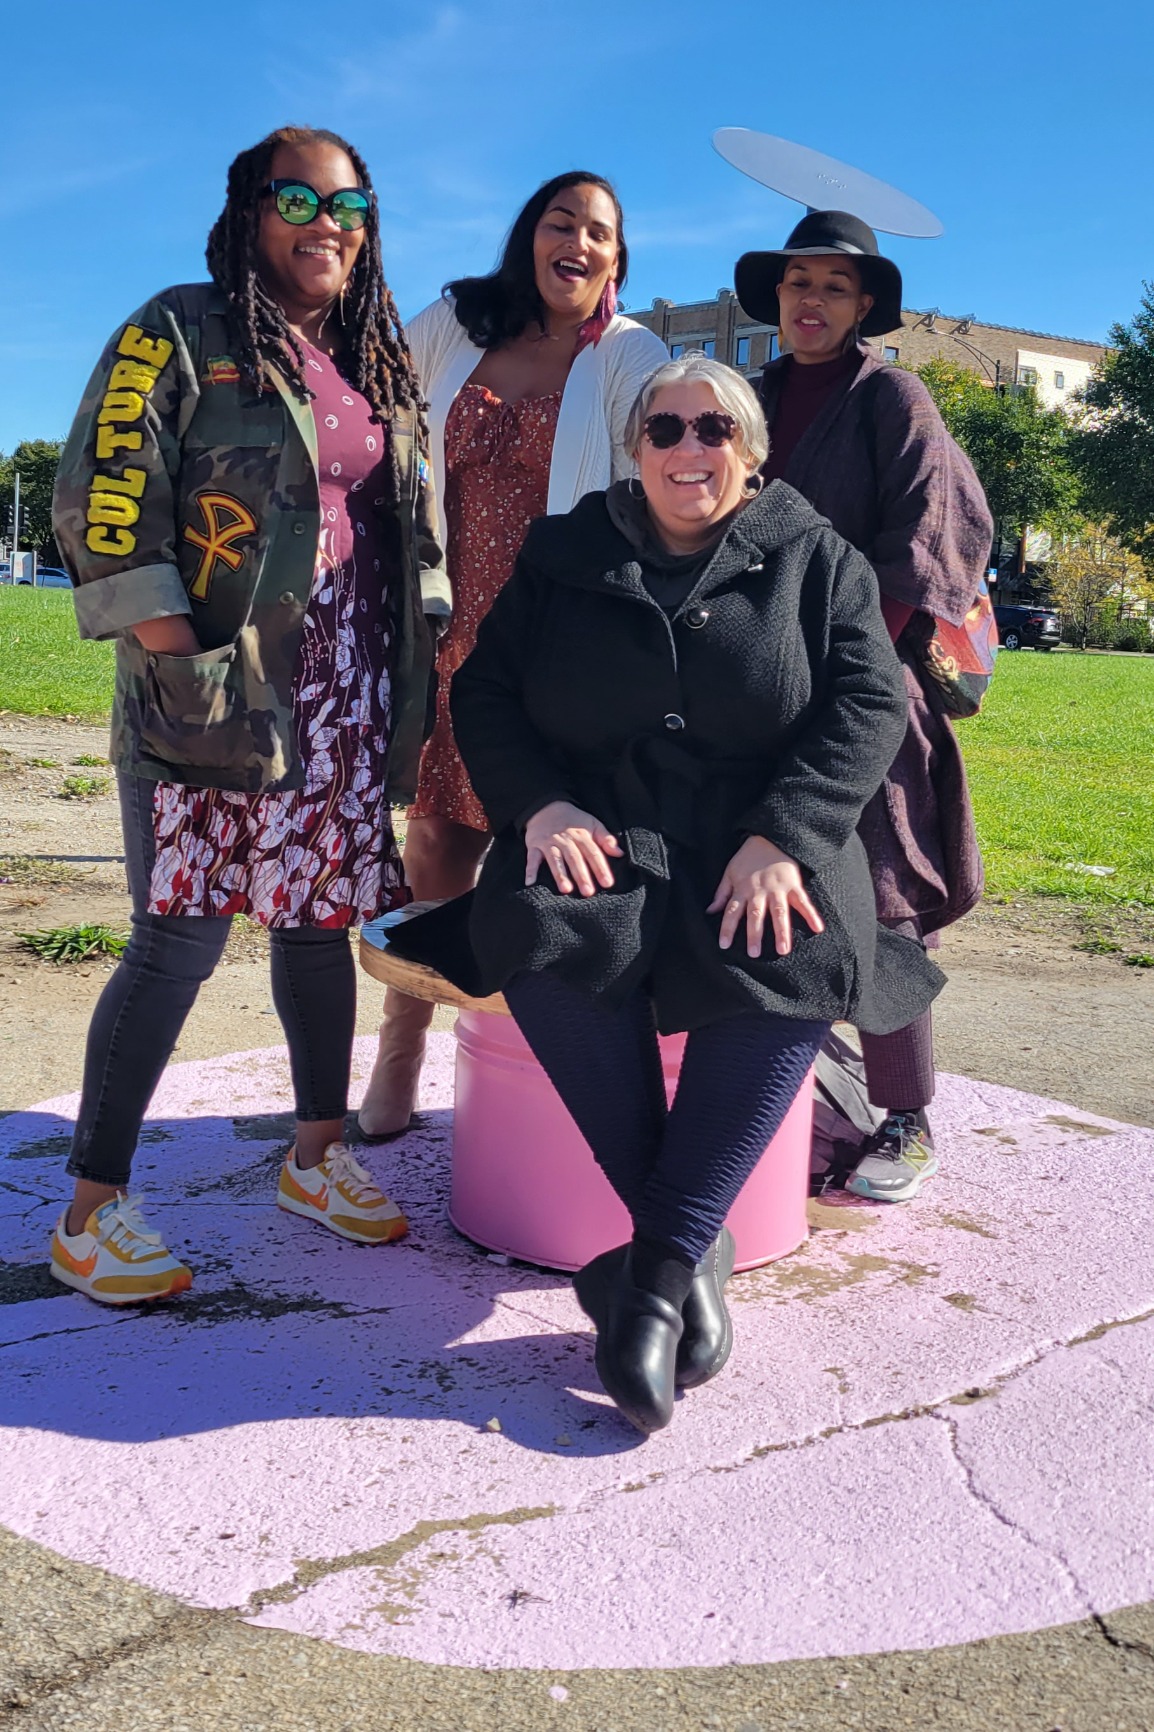 Photo showing pavilion pink bench with four invited poets, one sitting and the other three standing. All women are people of colour and smiling.